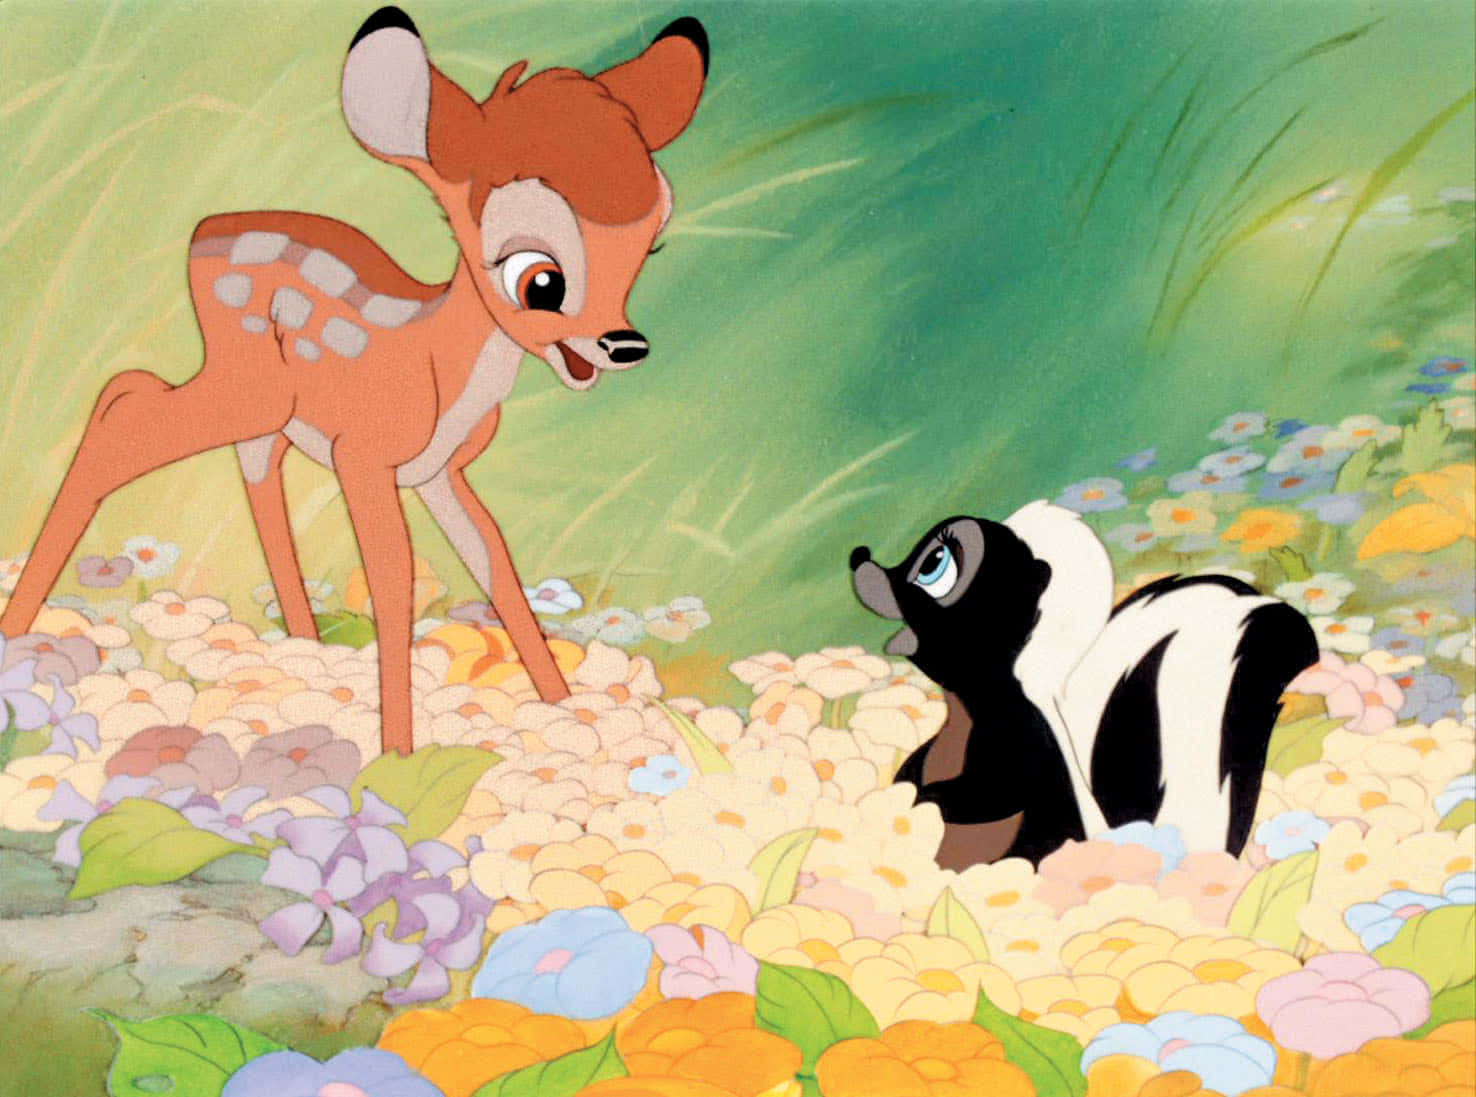 Thumper and Bambi's Timeless Friendship